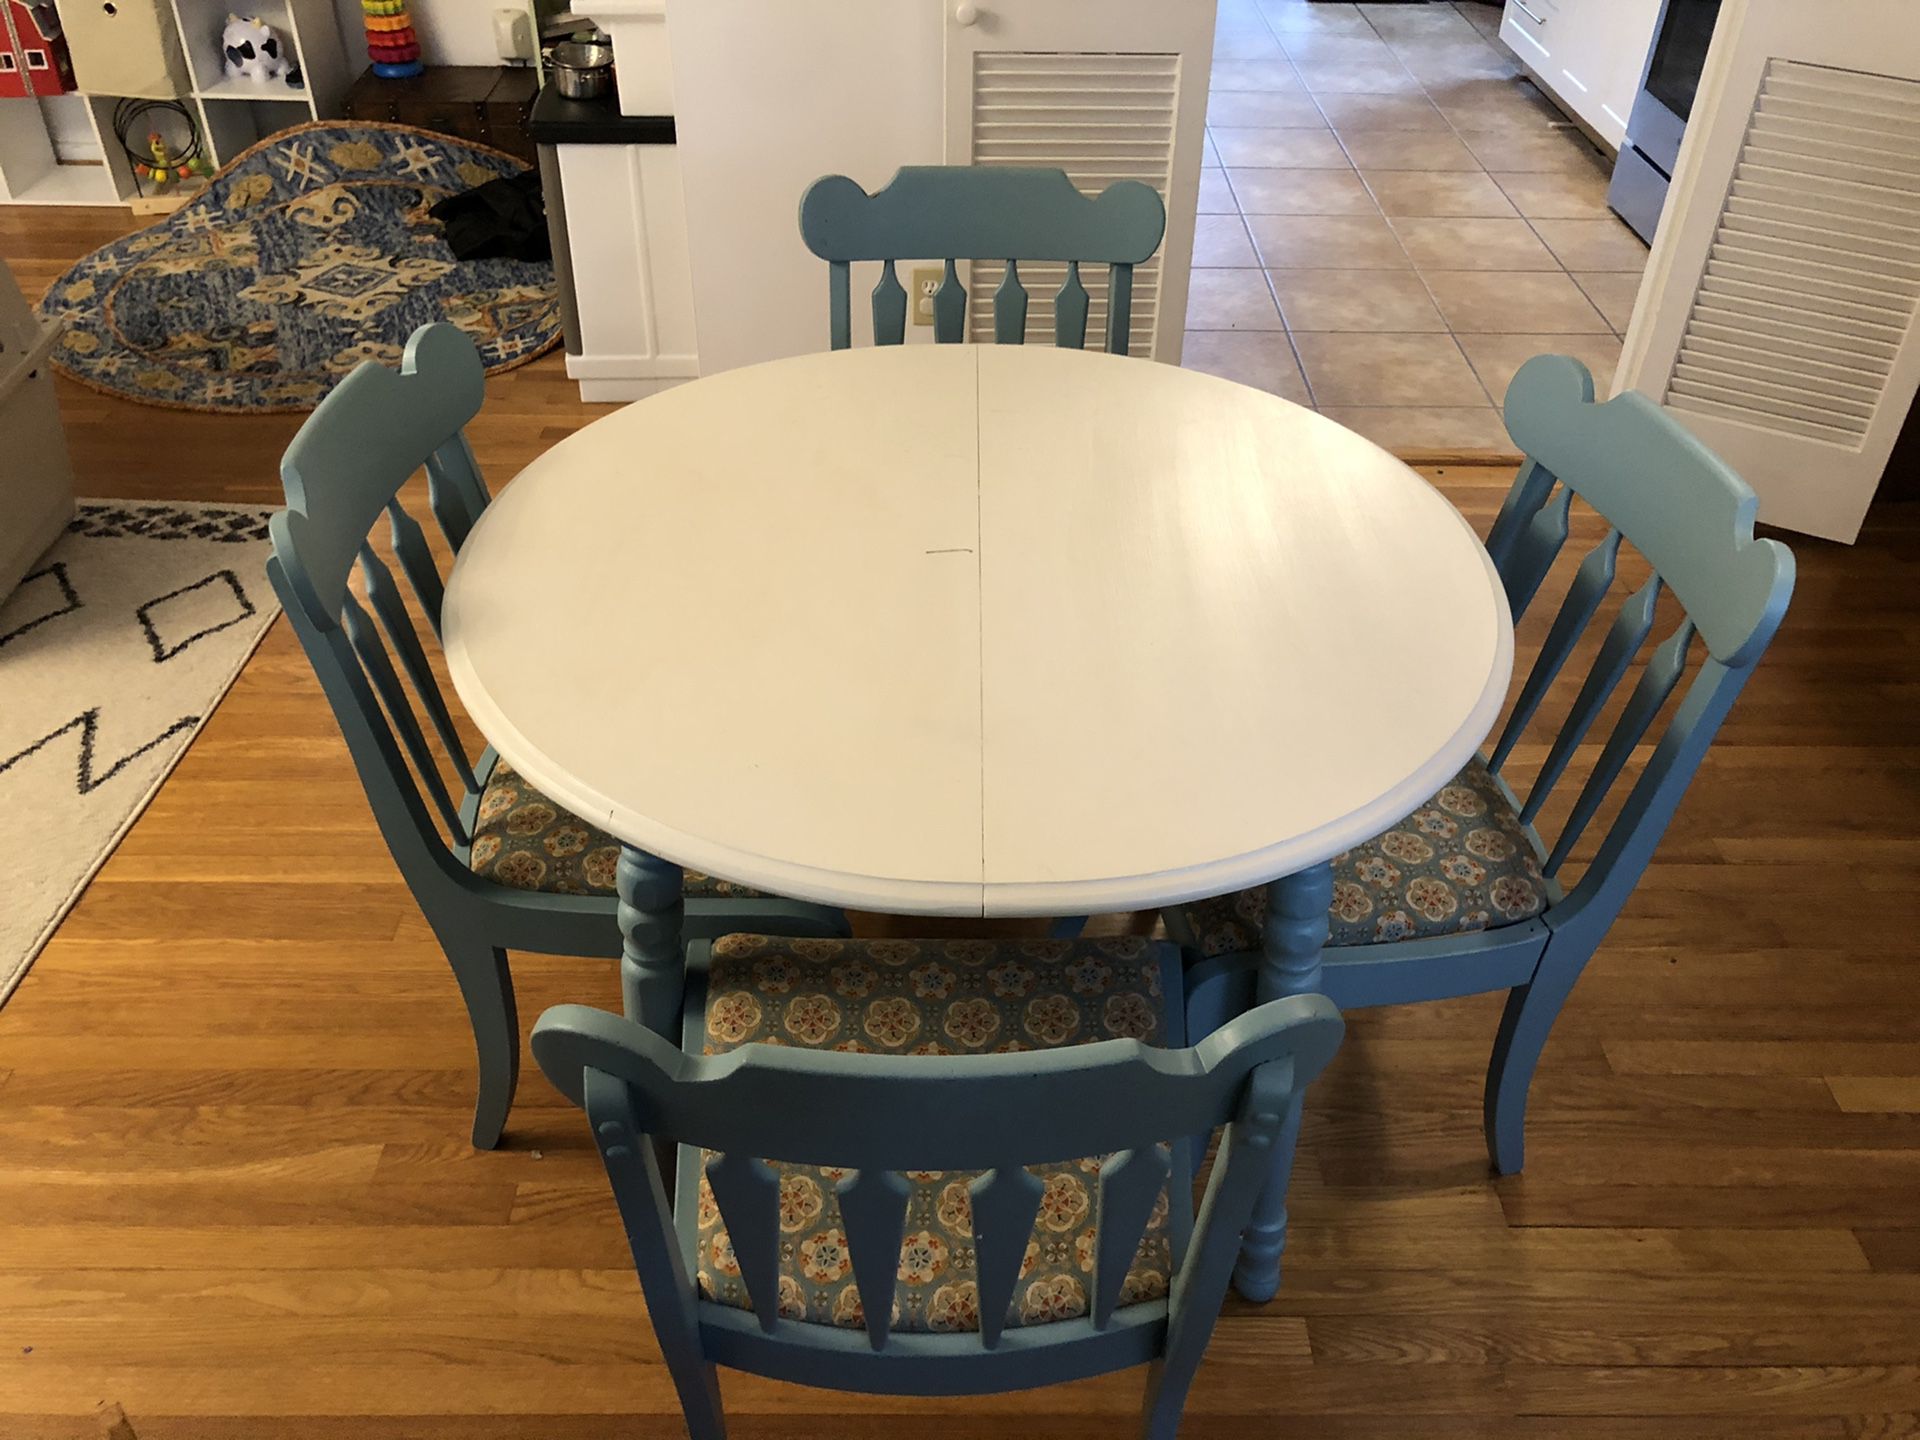 41” kitchen table with 4 chairs (includes 12” leaf)